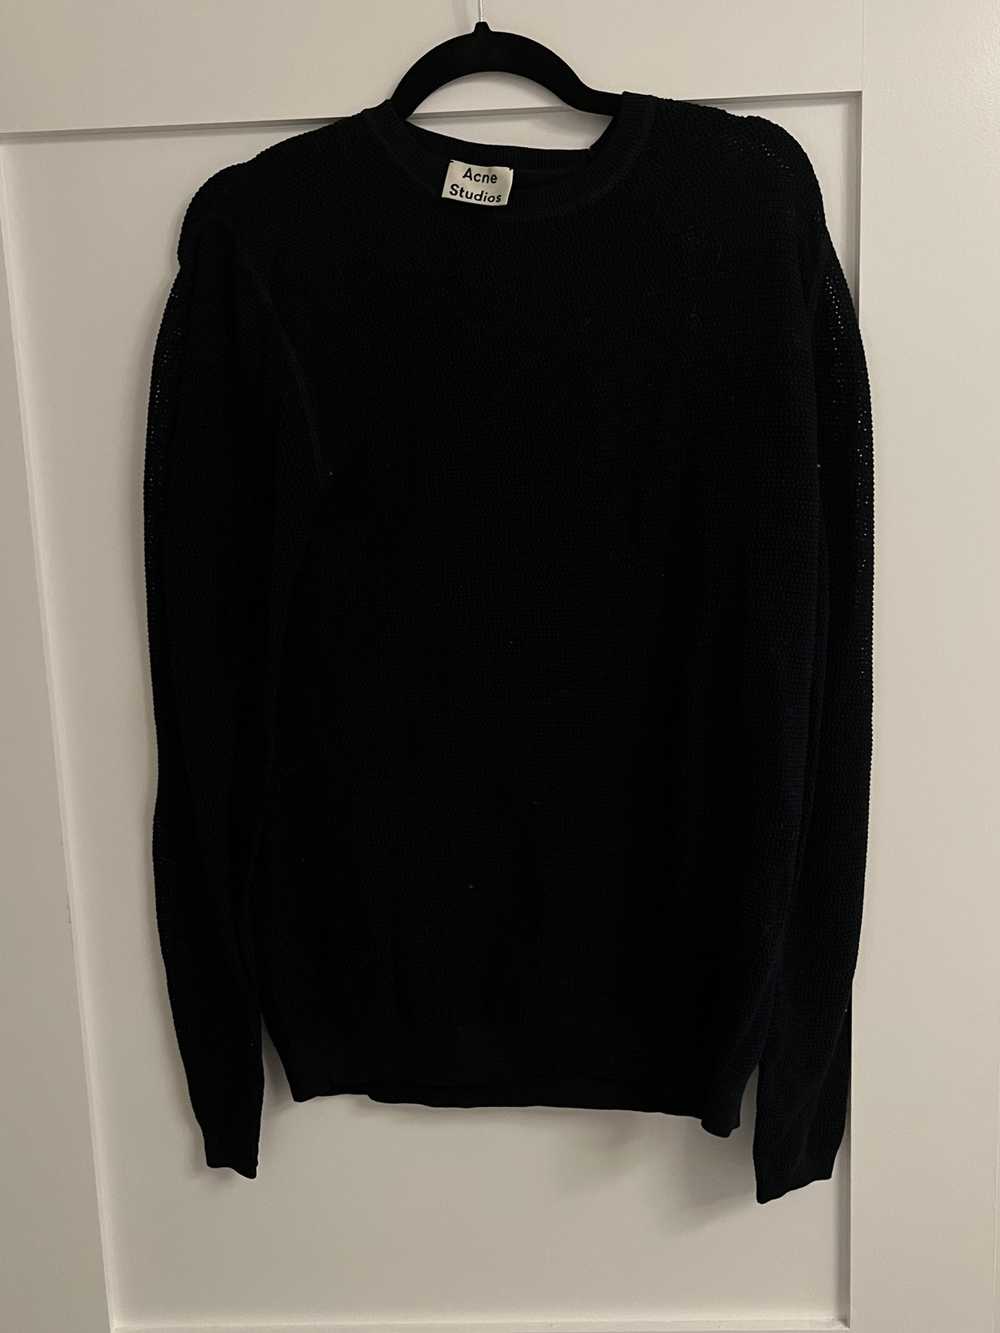 Acne Studios Navy Knit Pullover - image 1